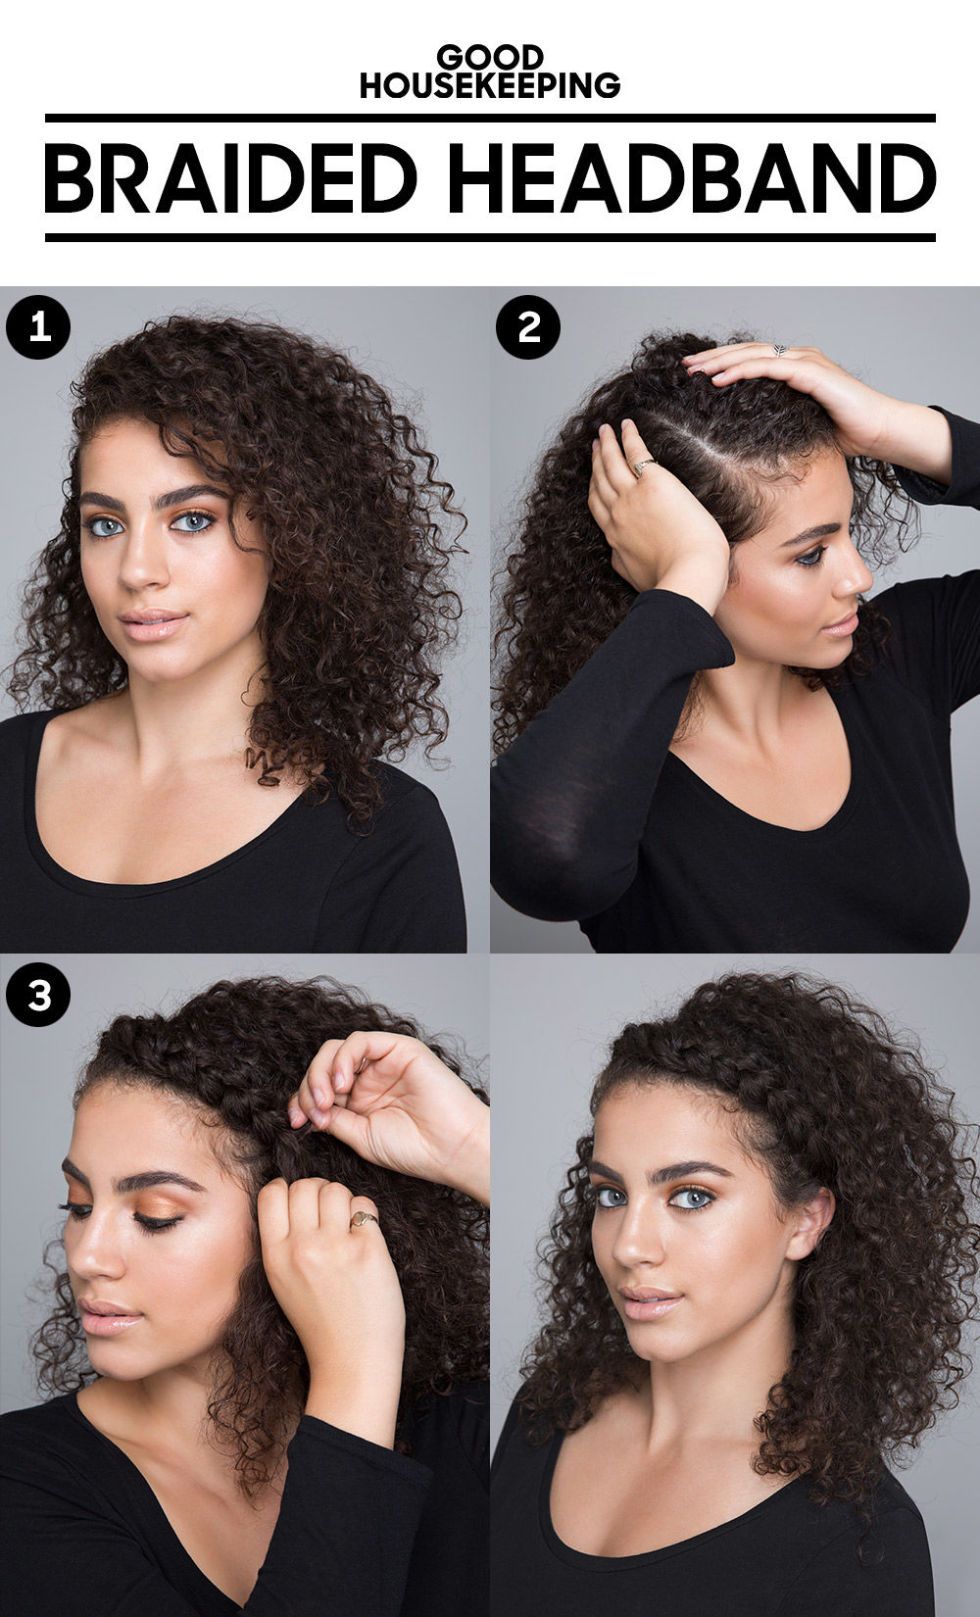 CURLY HAIRSTYLES - STYLES FOR SHORT, MEDIUM, AND LONG HAIR